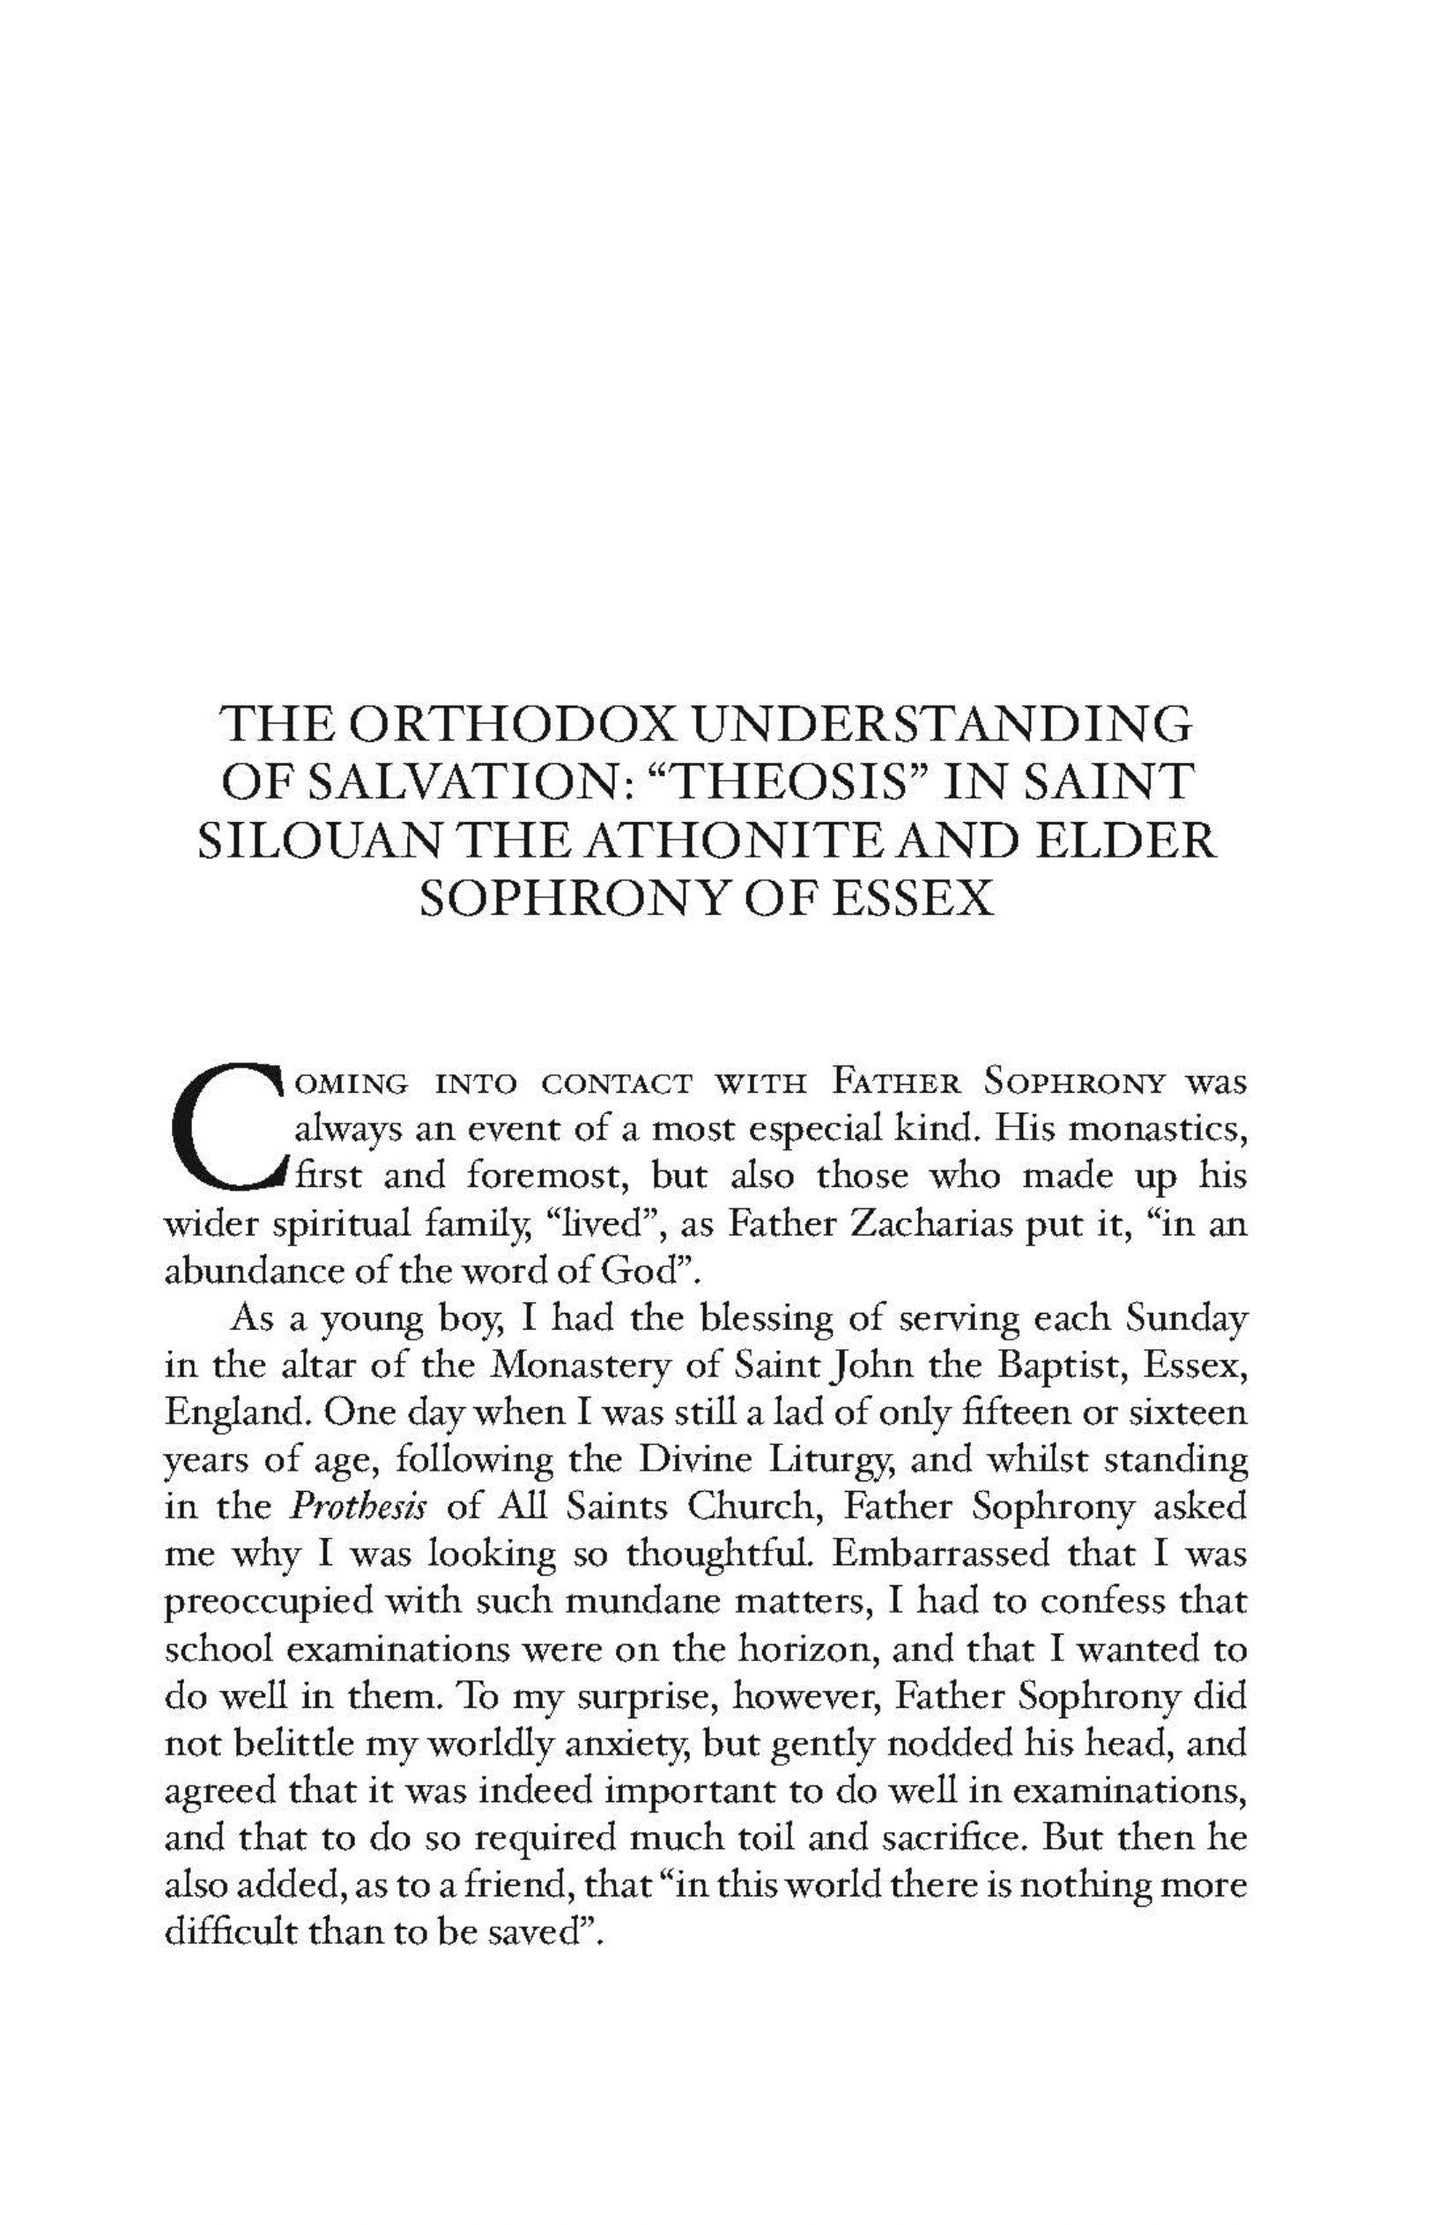 The Orthodox Understanding of Salvation, by C. Veniamin